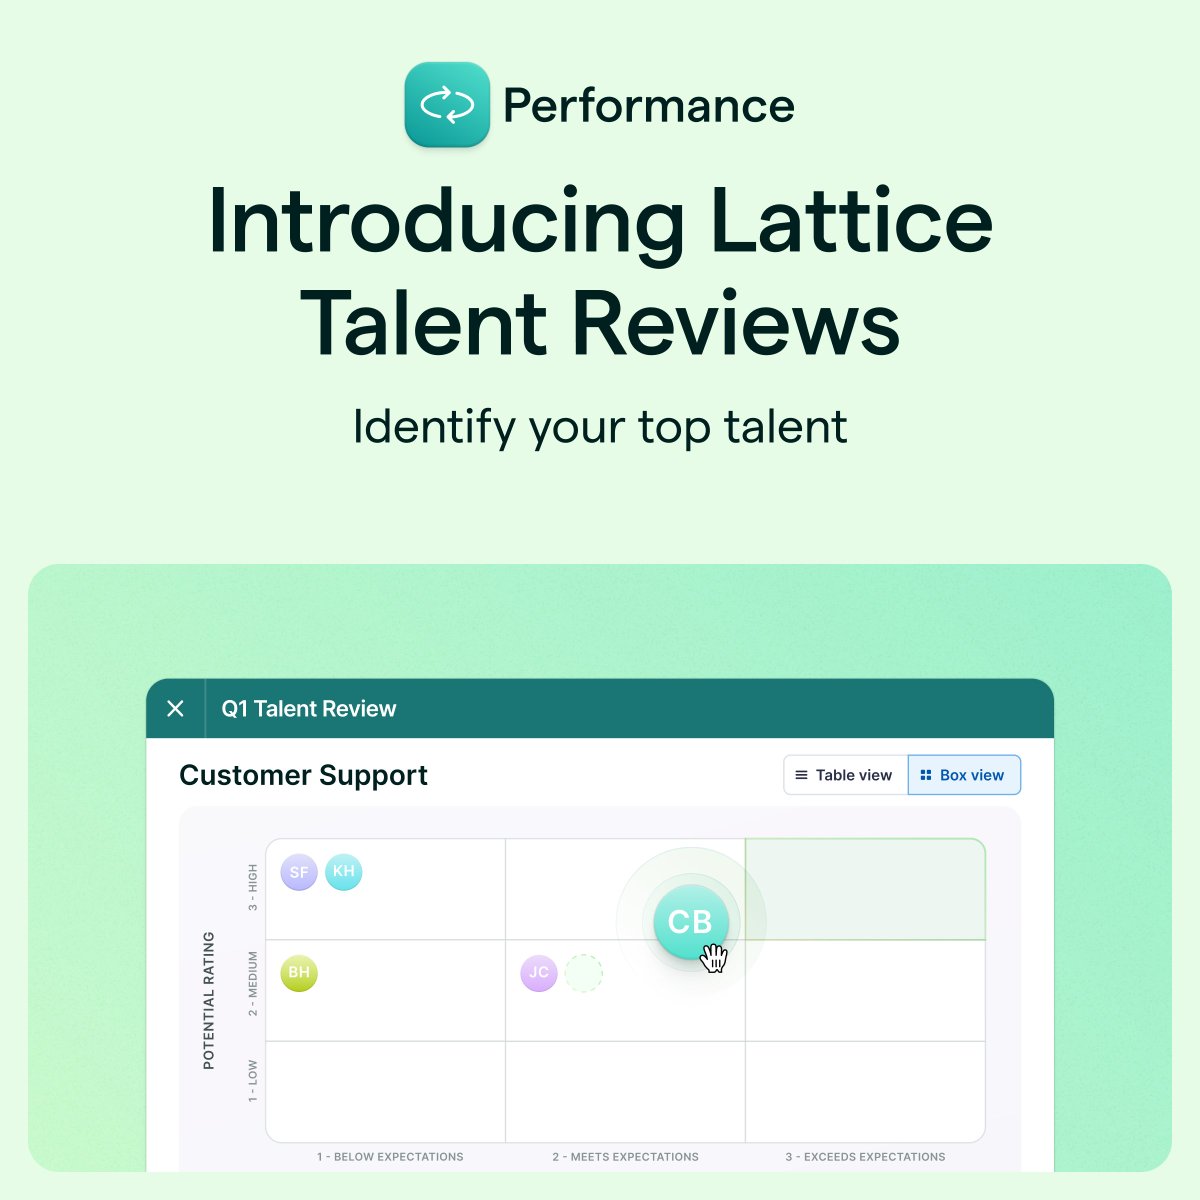 You asked, we delivered: Introducing Lattice Talent Reviews ✨ Identify your top talent with seamless talent assessments and gain insights into your employees’ performance and potential whenever you need it. Learn more: bit.ly/3TKmpCc